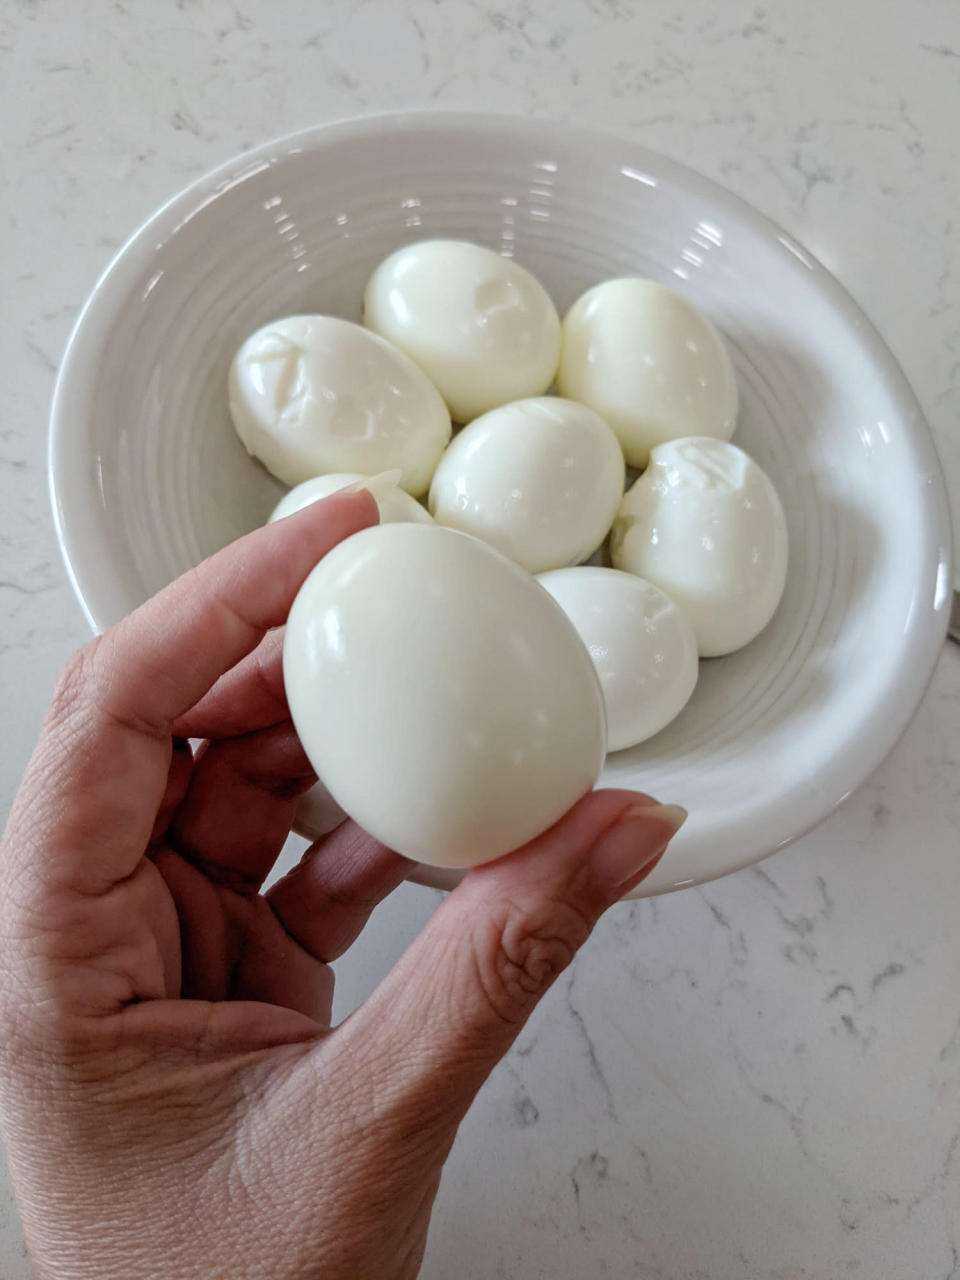 A person holding a peeled egg above a bowl of peeled eggs